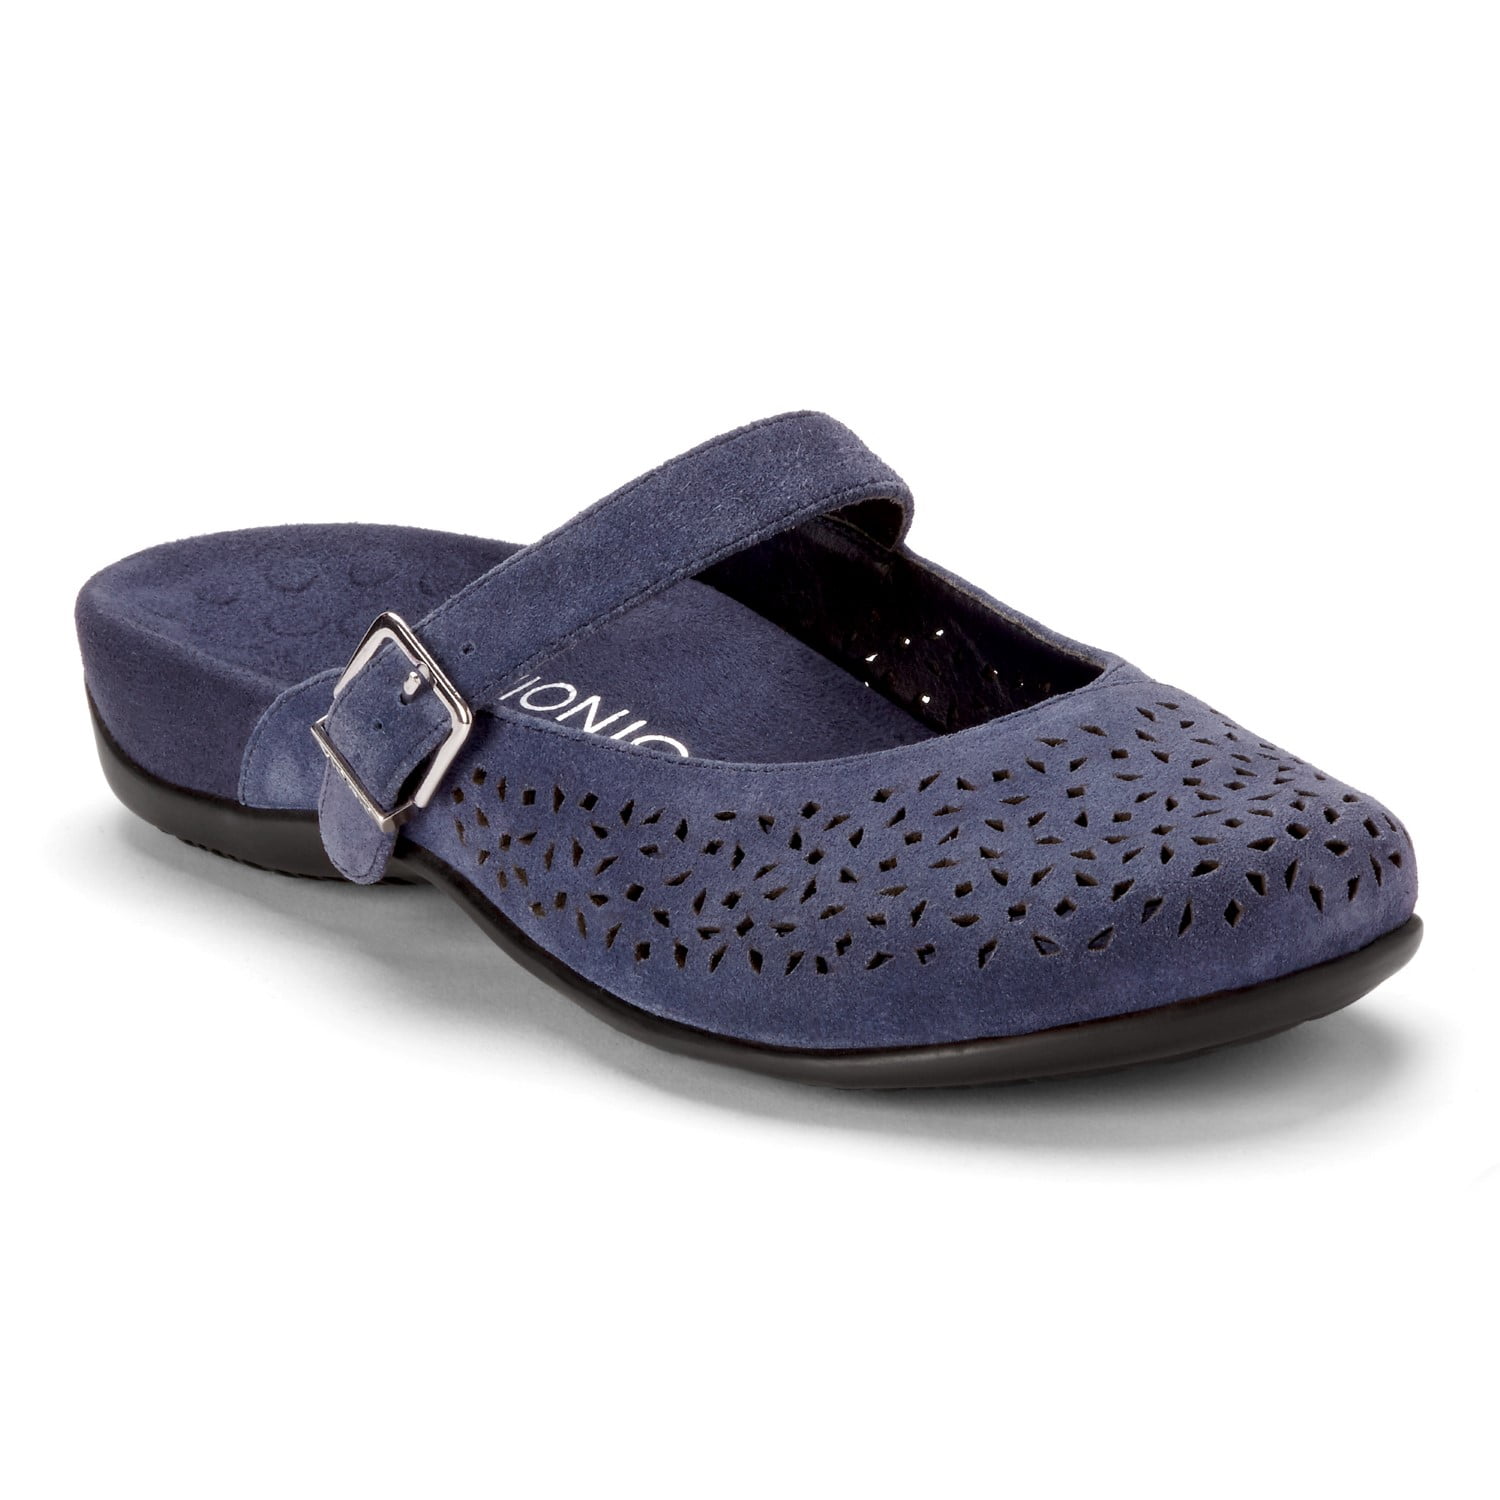 jogger chappals online shopping